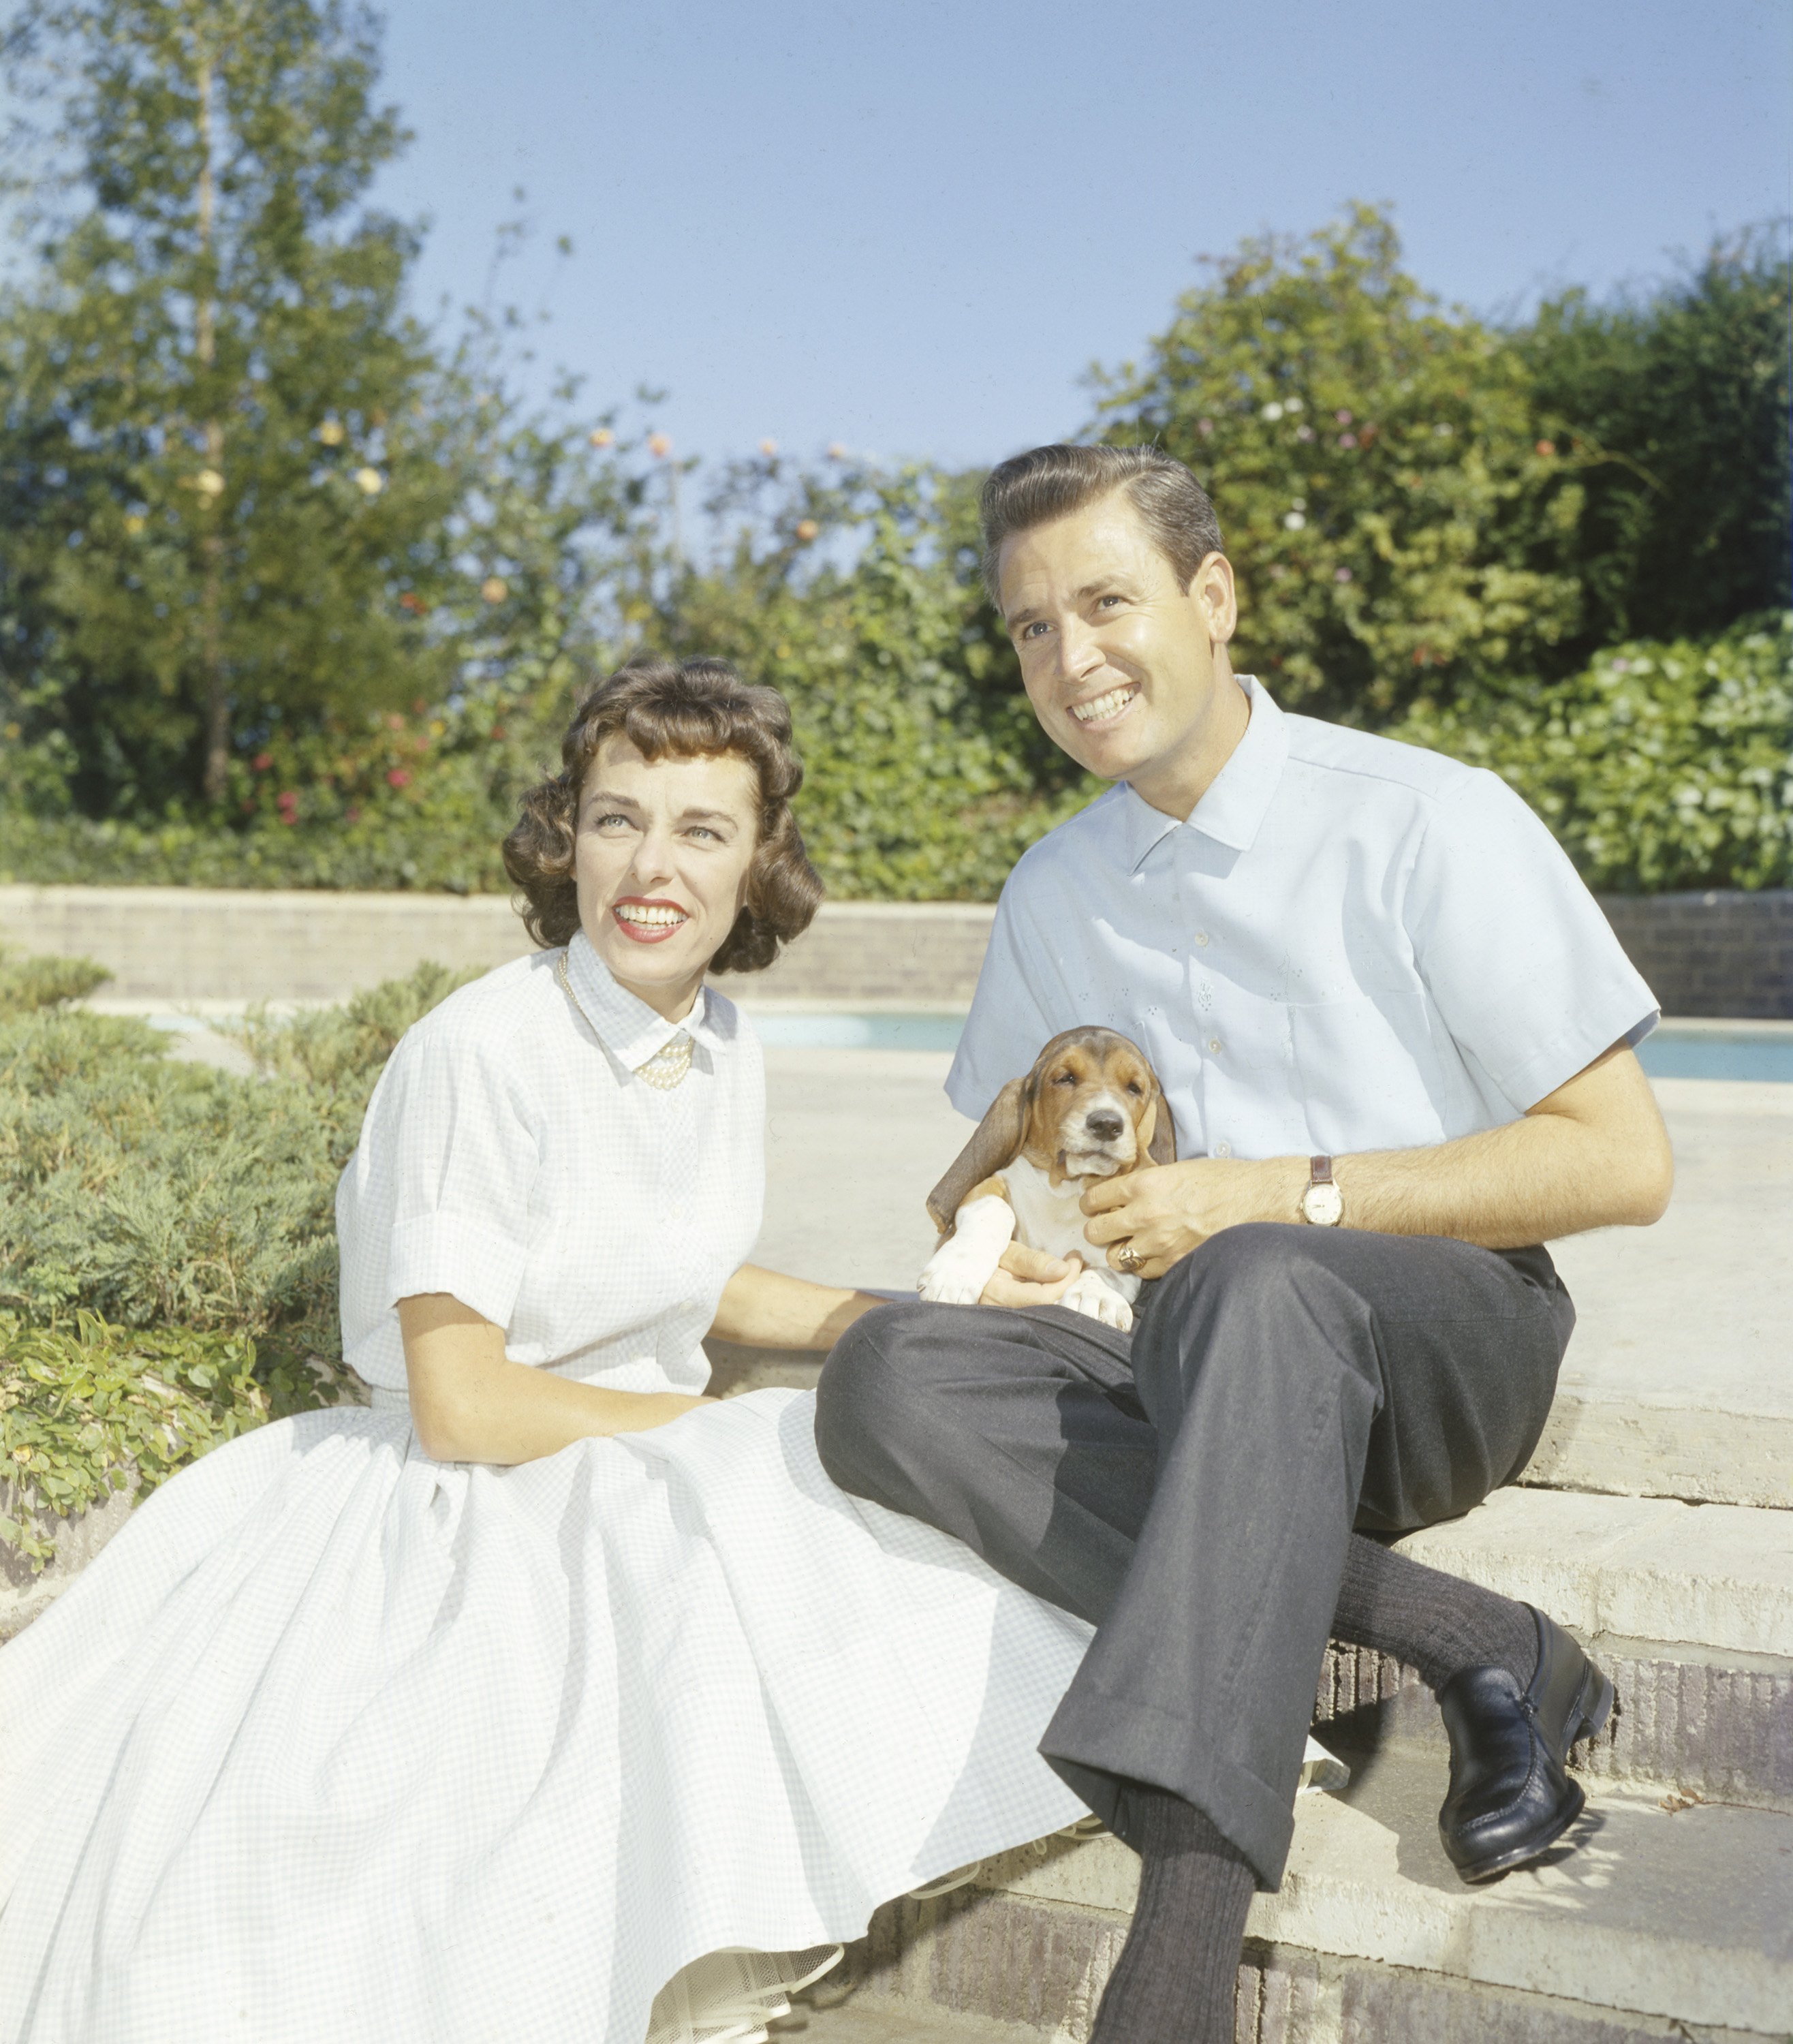 Dorothy Jo Gideon and Bob Barker posing for a picture with a puppy | Source: Getty Images